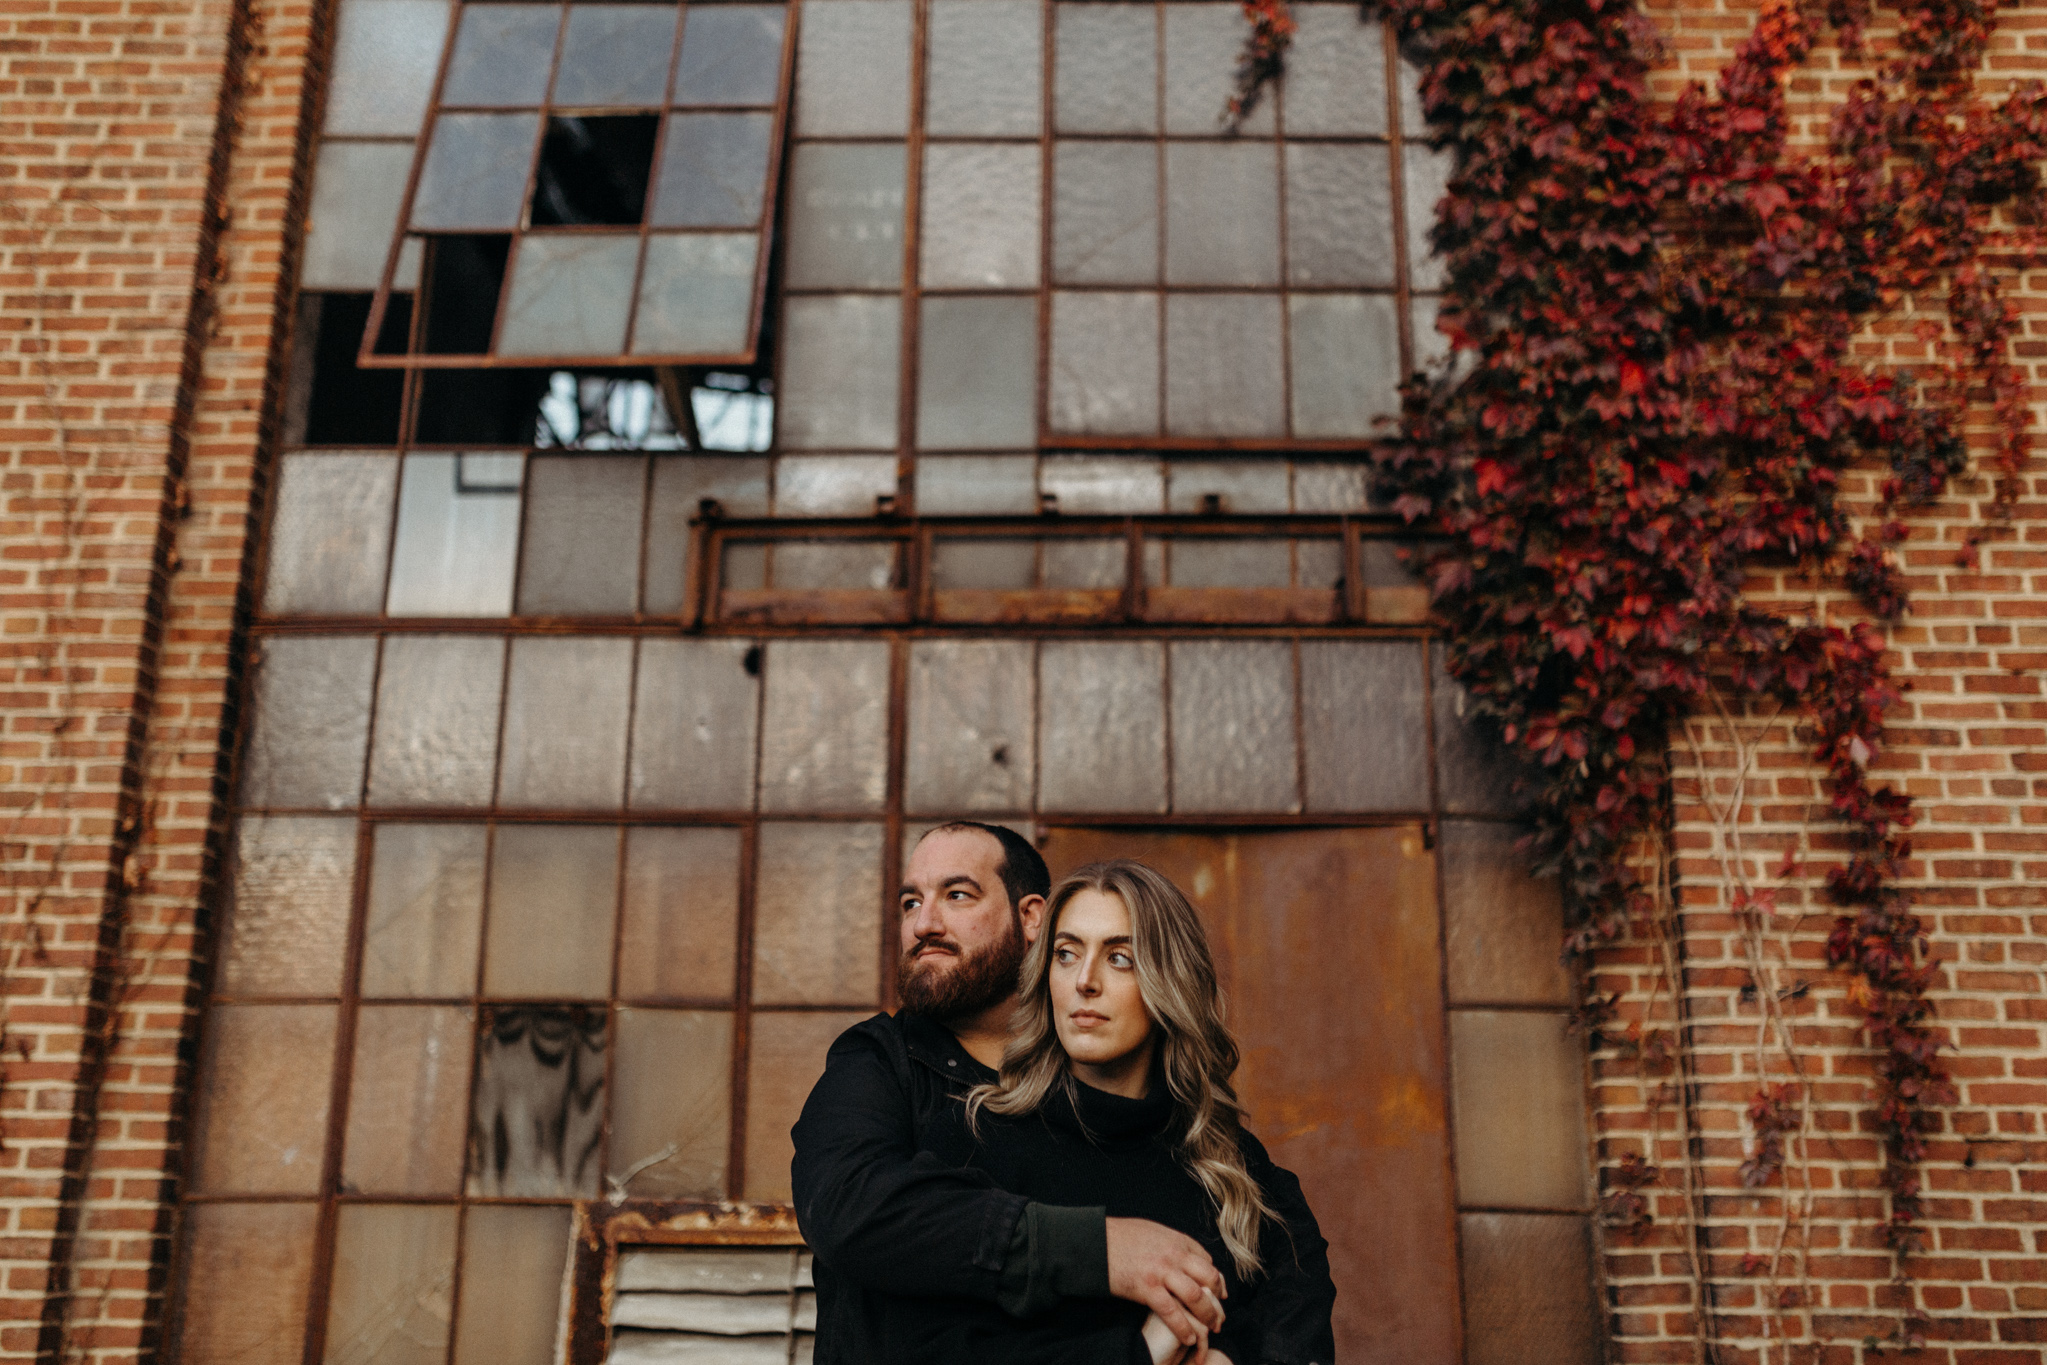 Moody Industrial Baltimore Engagement At Clipper Mill, Maryland Wedding Photographer Victoria Selman